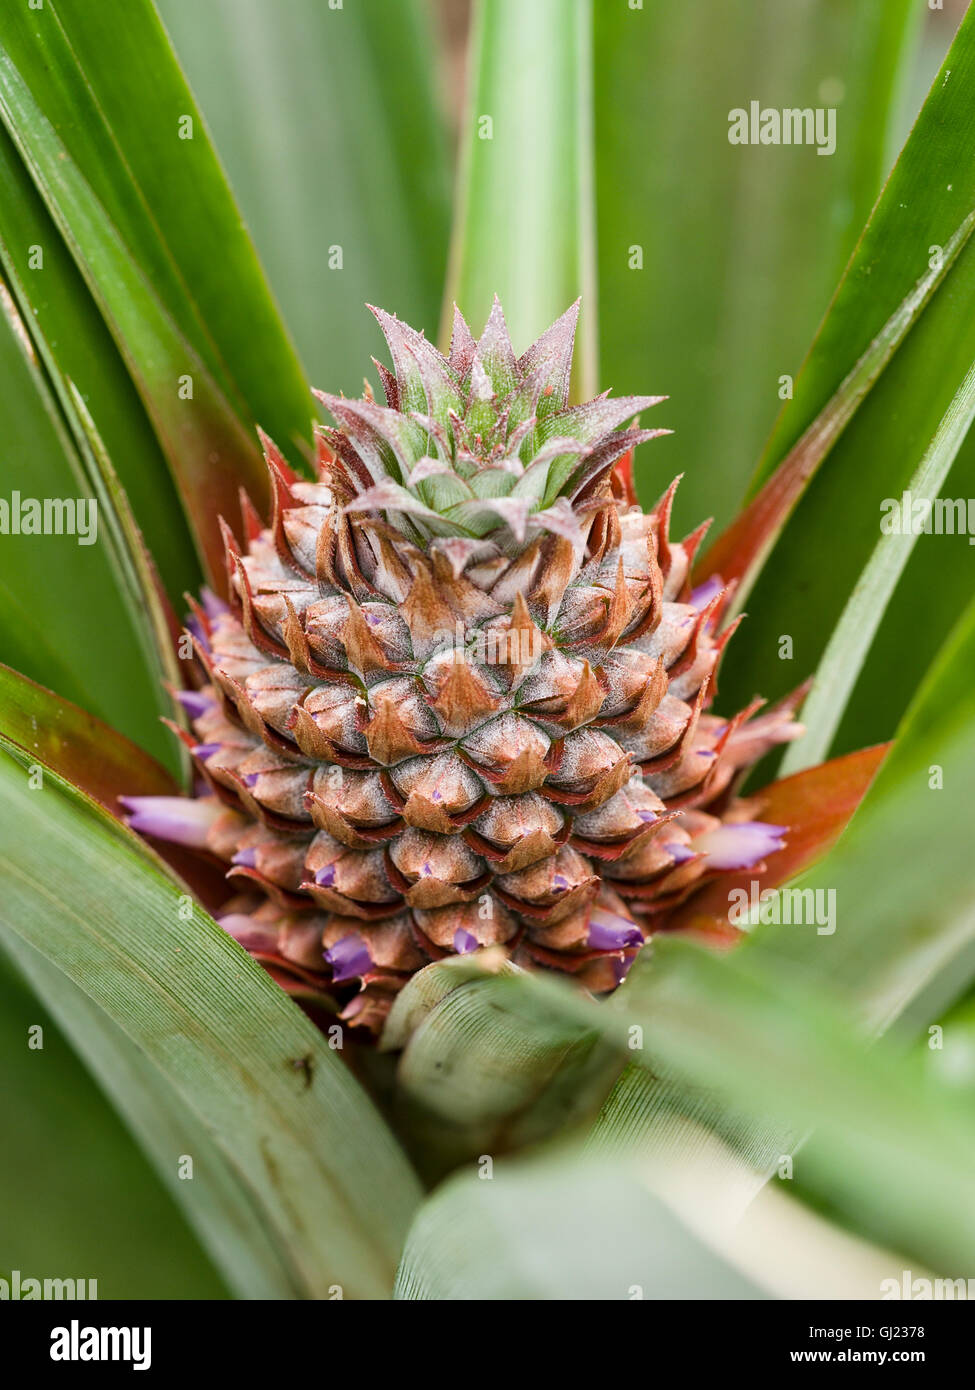 Pineapple Florets on a young fruit. Purple flowers sprout from a young pineapple fruit as it matures in an Azorian Greenhouse Stock Photo